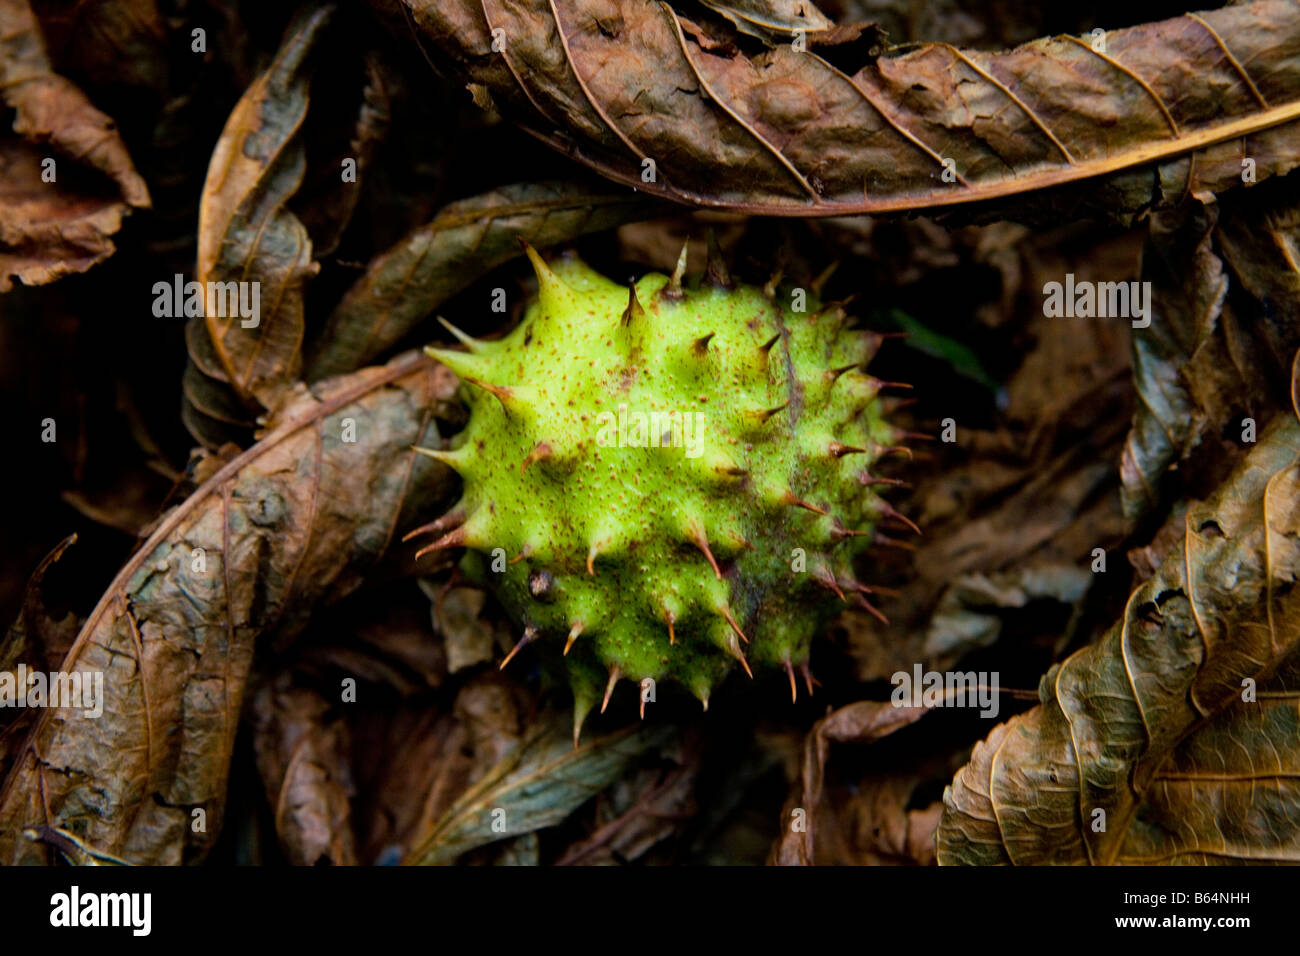 Fallen Horse Chestnut conker in a bed of autunm leaves Stock Photo